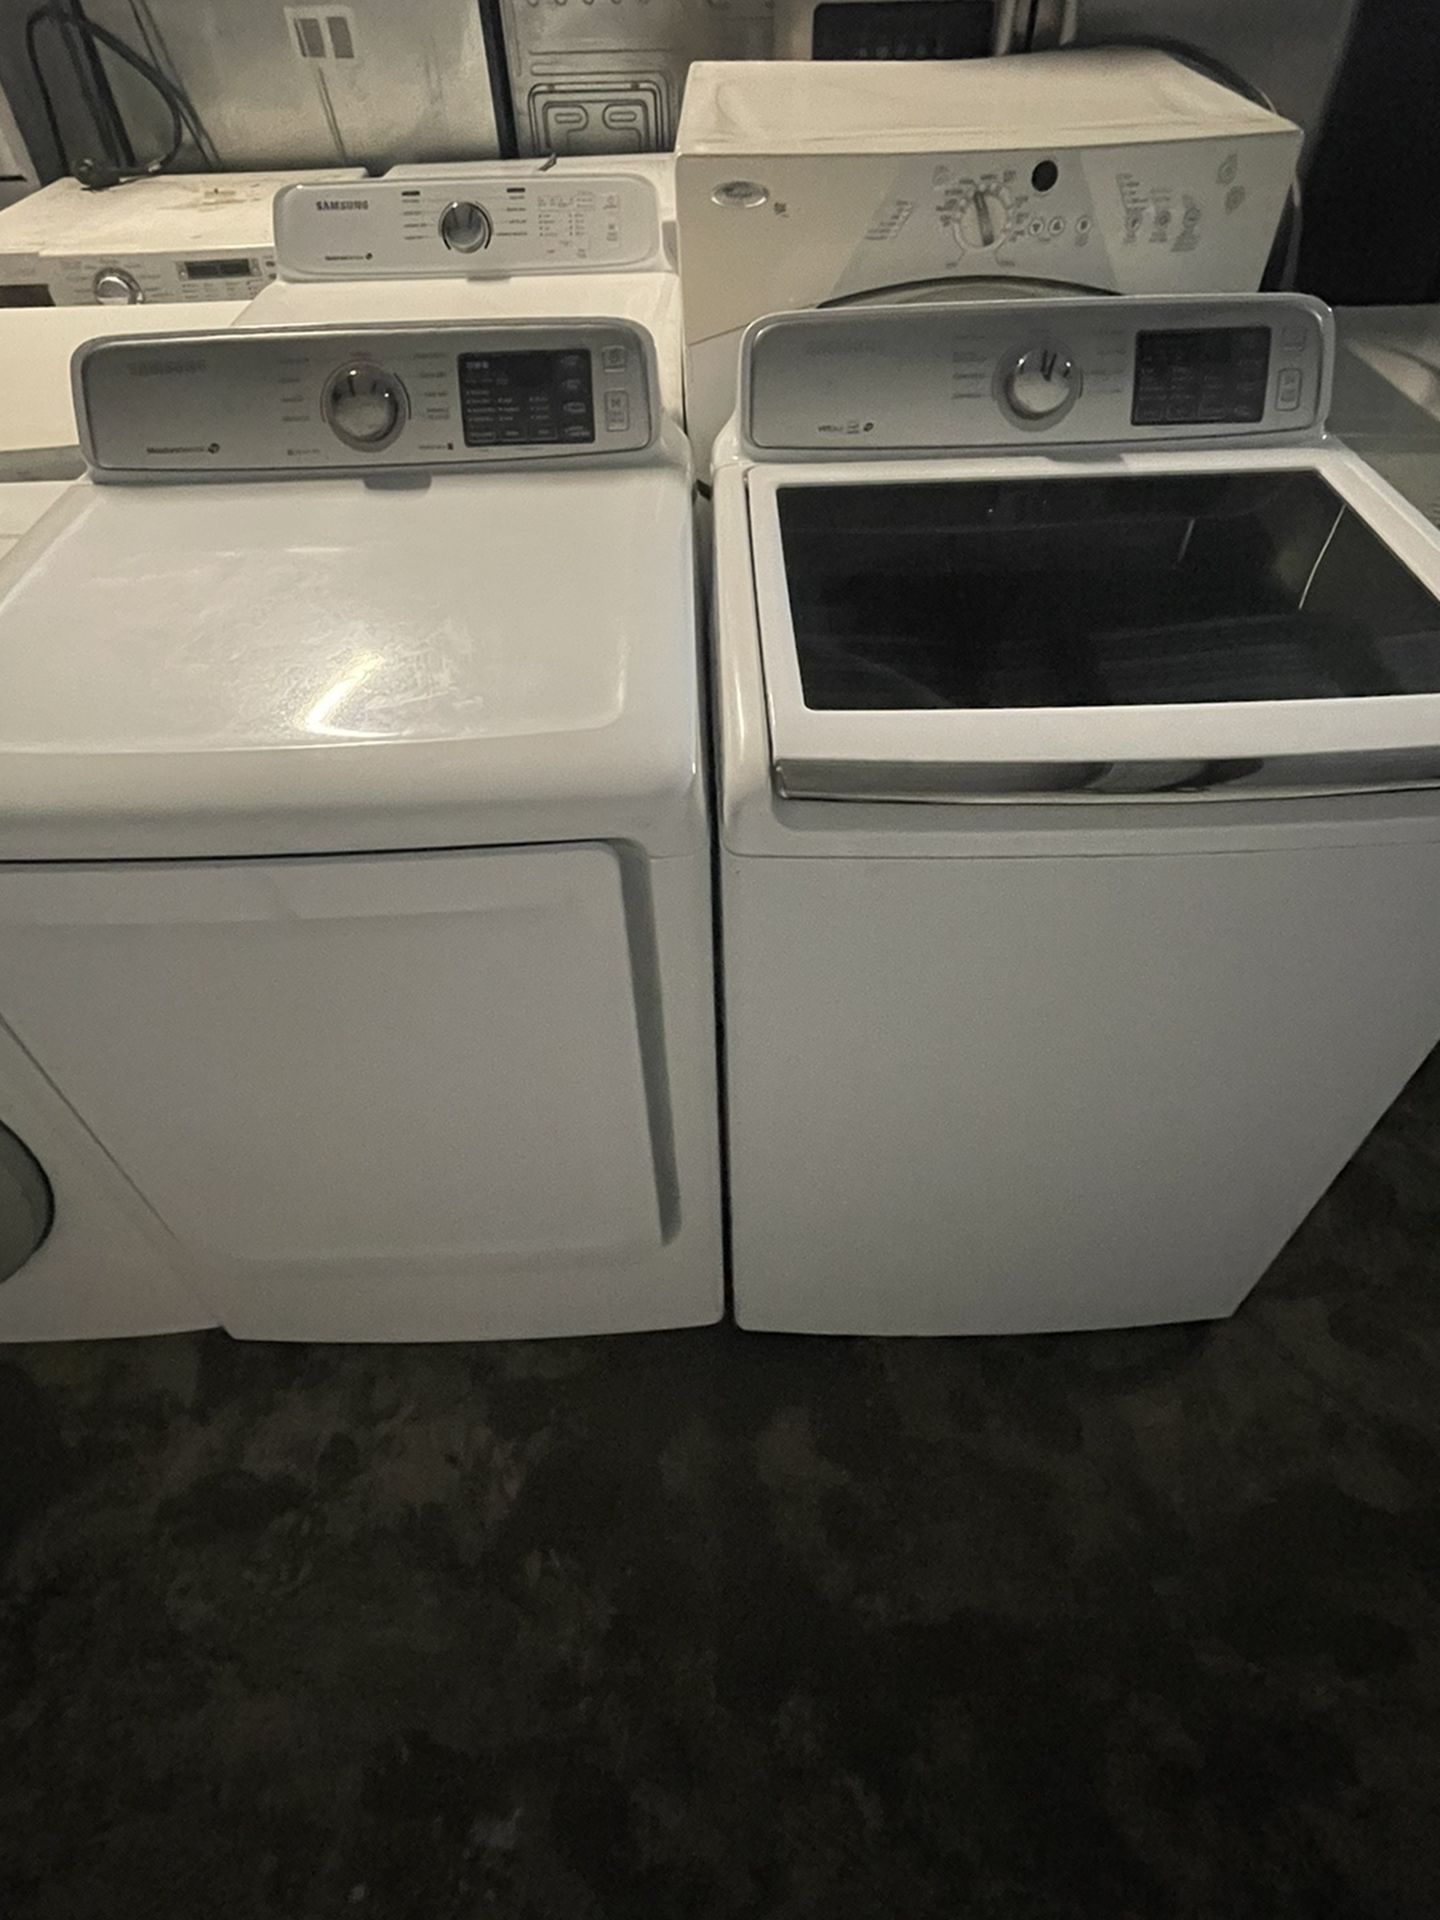 Samsung Washer And Dryer / delivery Available